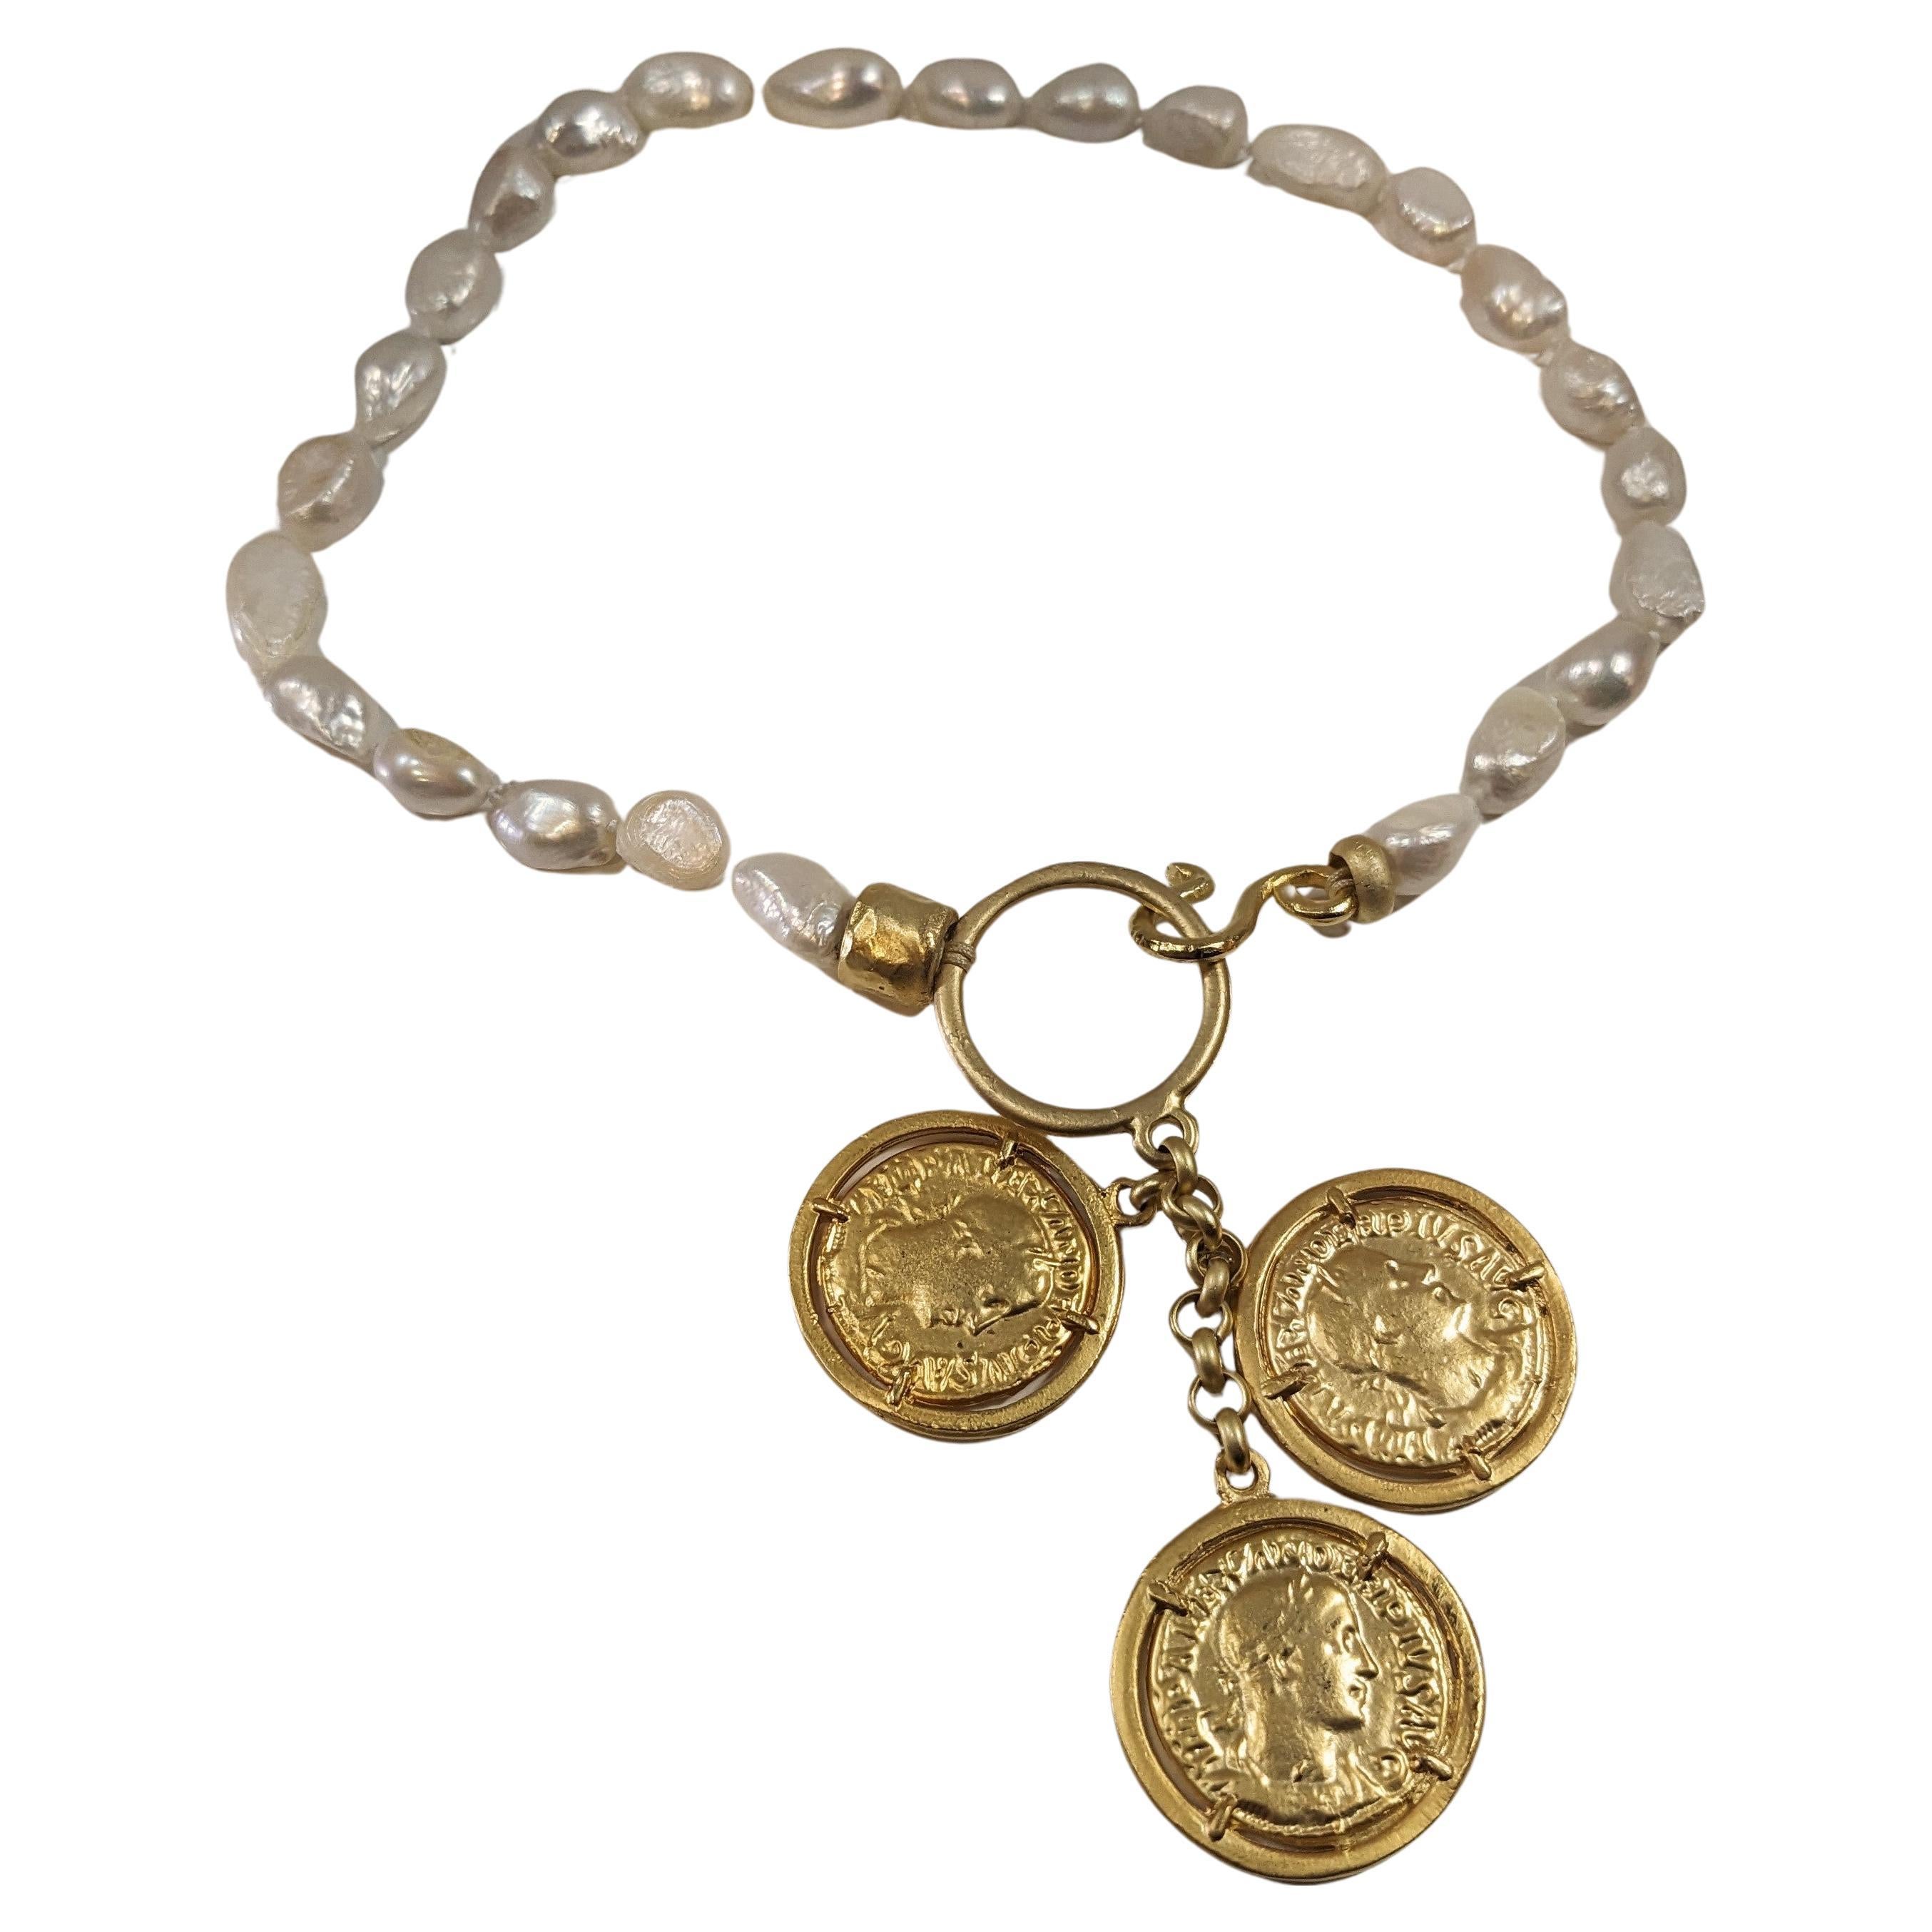  Short Necklace of White River Pearls with Central Hoop and Trio of Coins